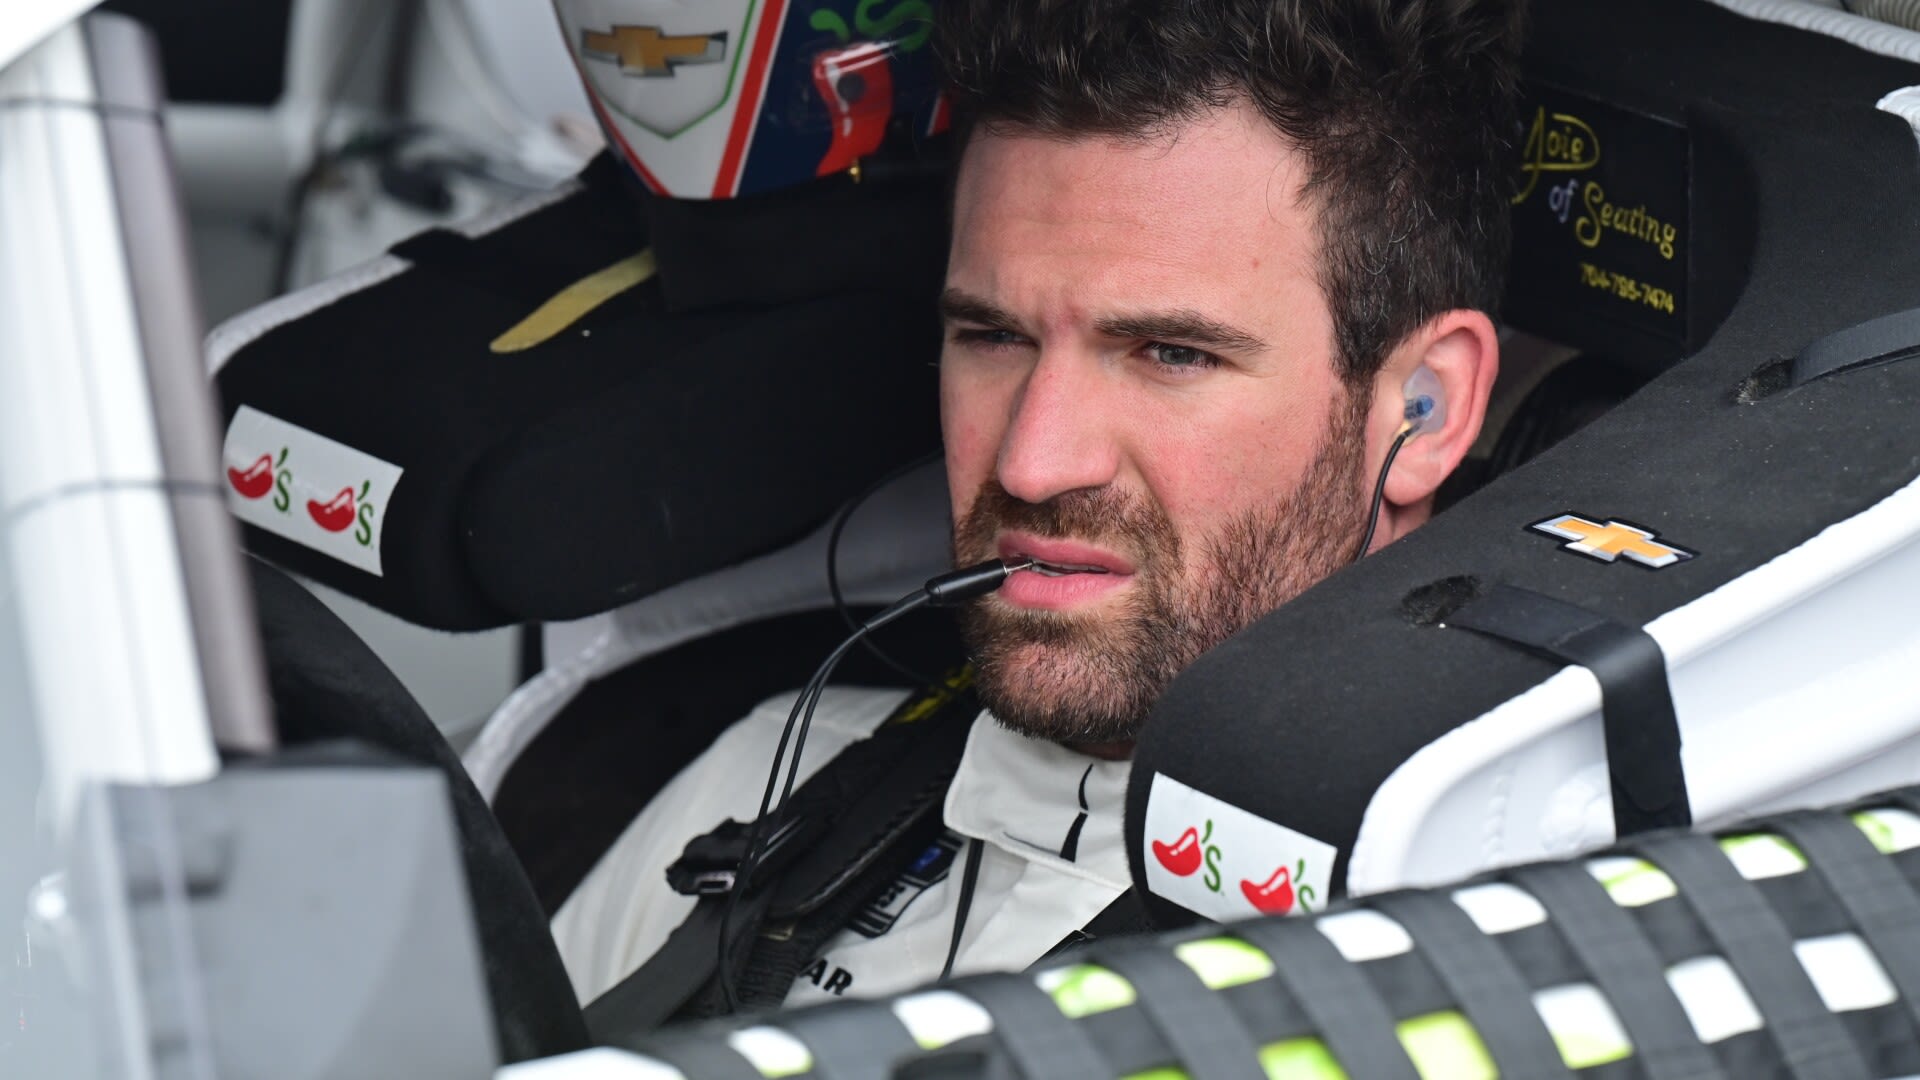 NASCAR will not penalize Corey LaJoie for contact with Kyle Busch at Pocono